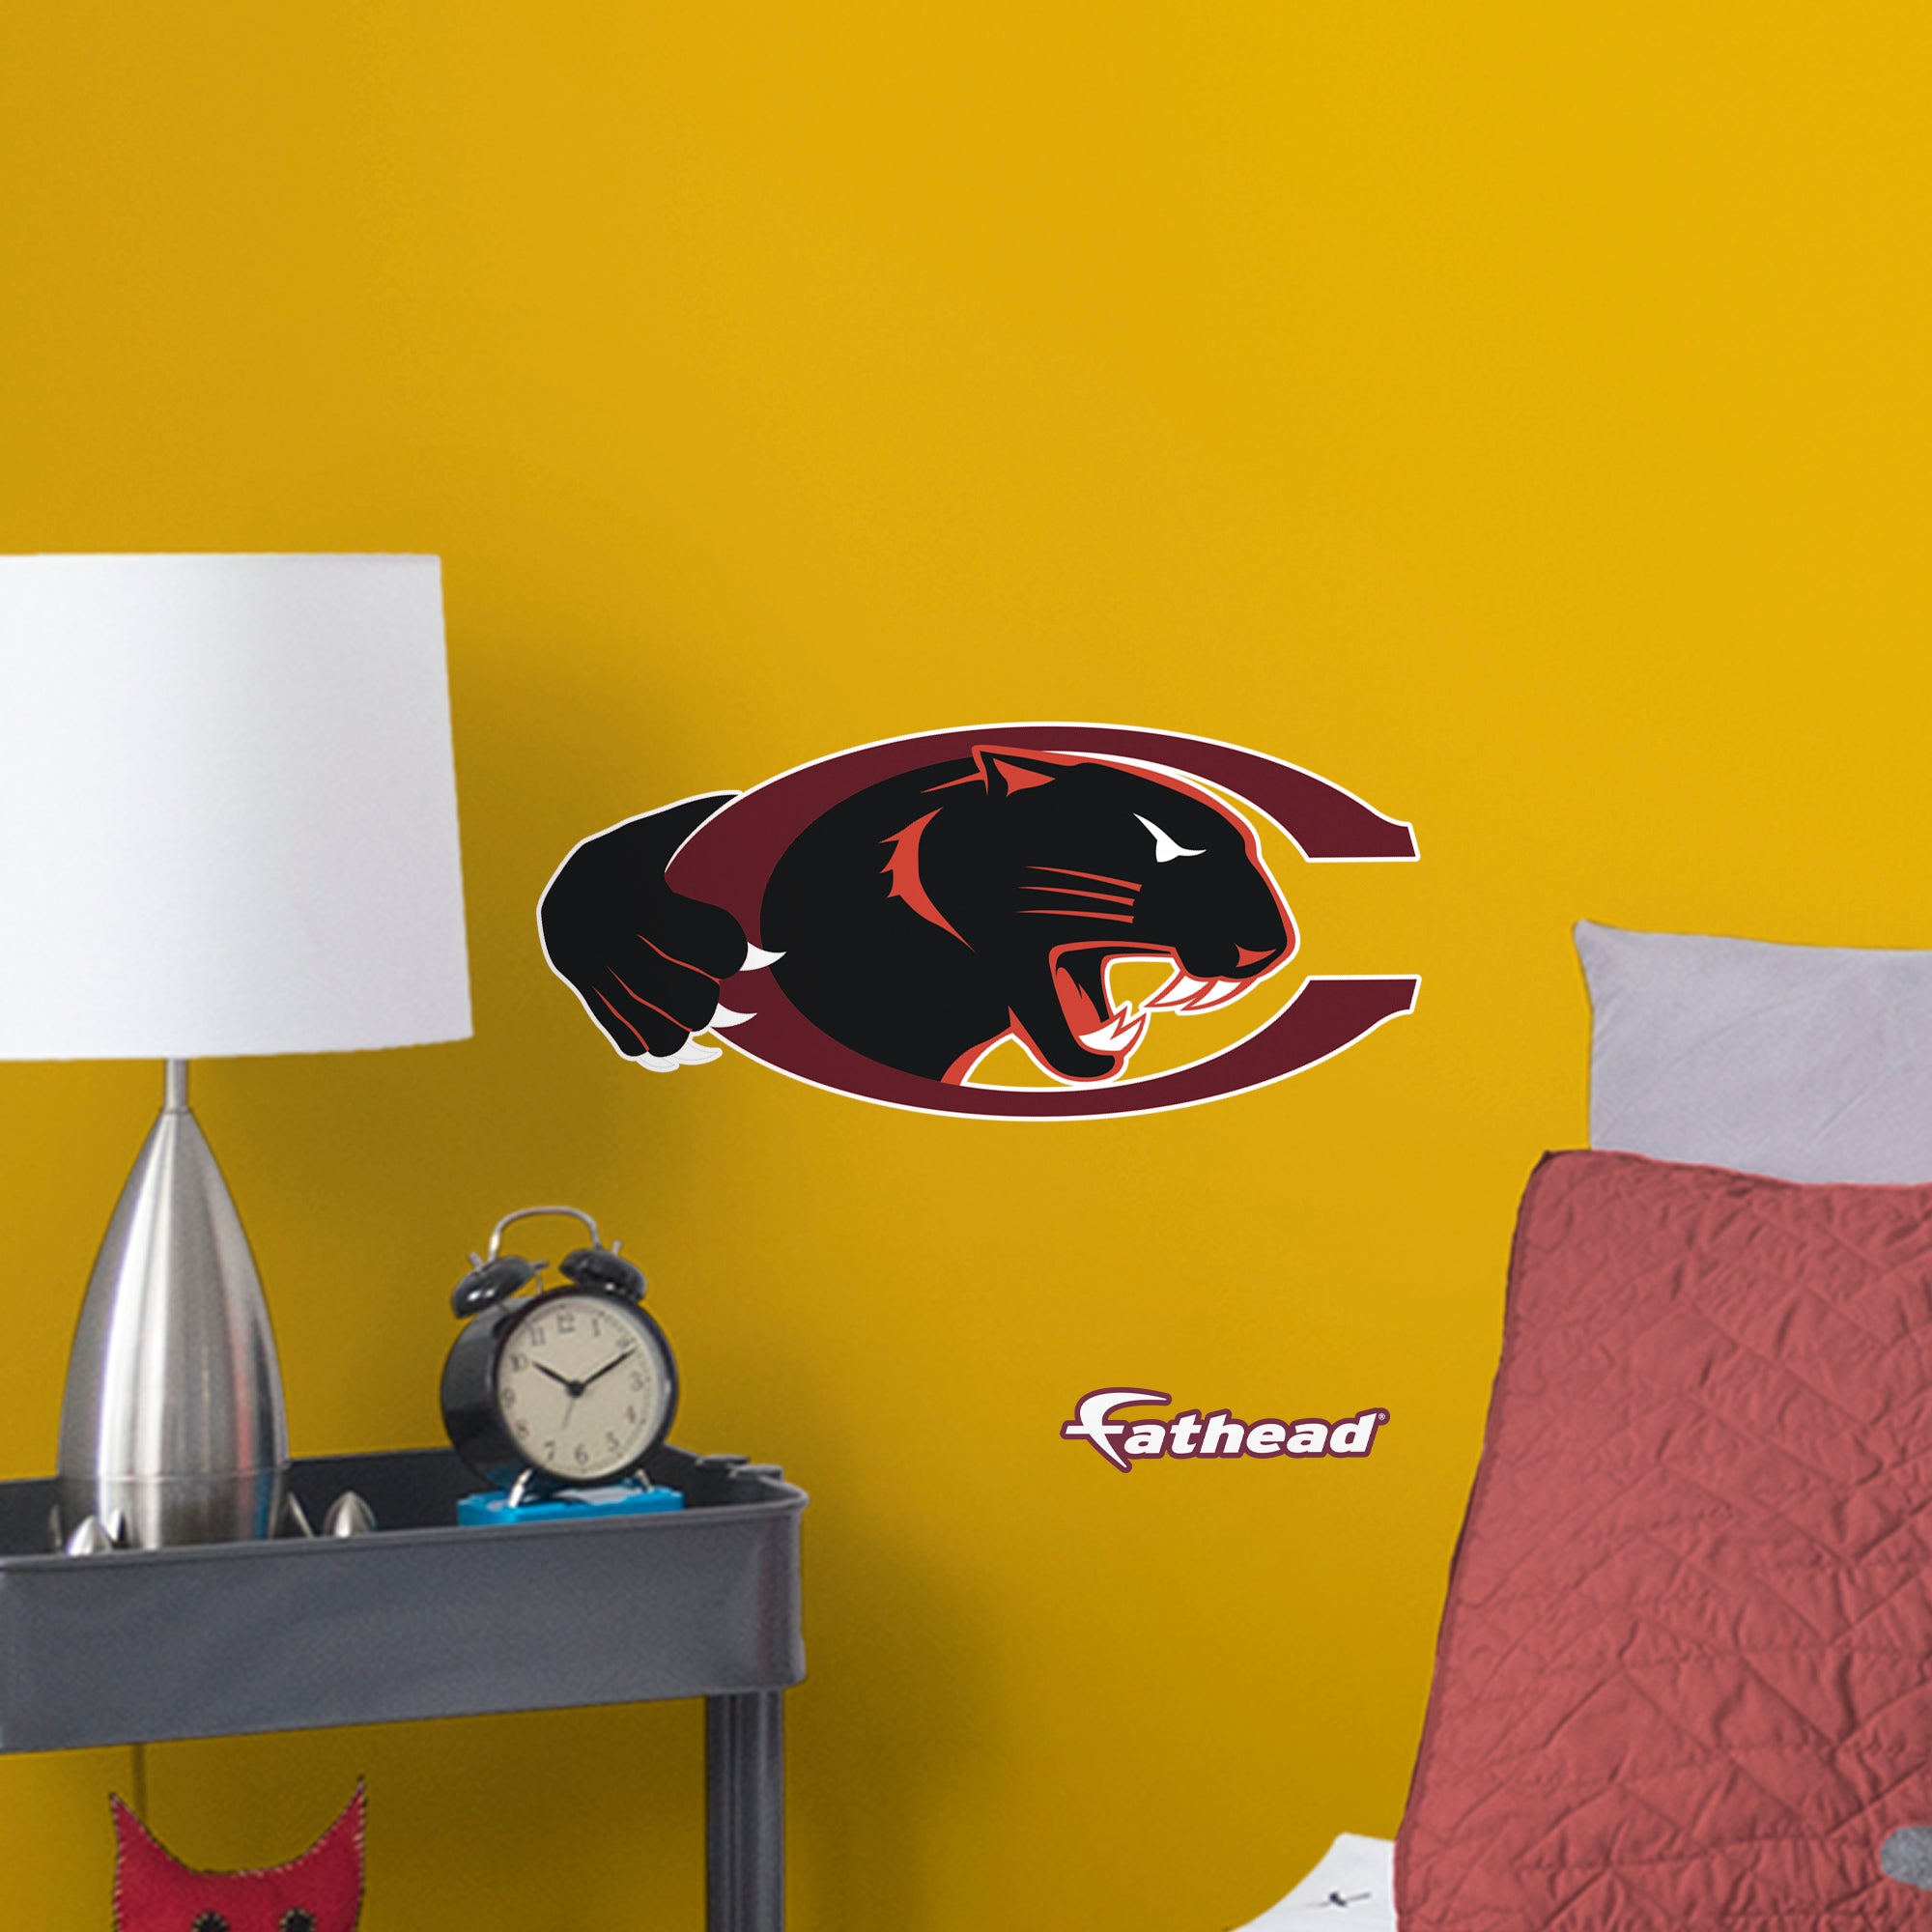 Claflin University 2020 Logo - Officially Licensed NCAA Removable Wall Decal Large by Fathead | Vinyl